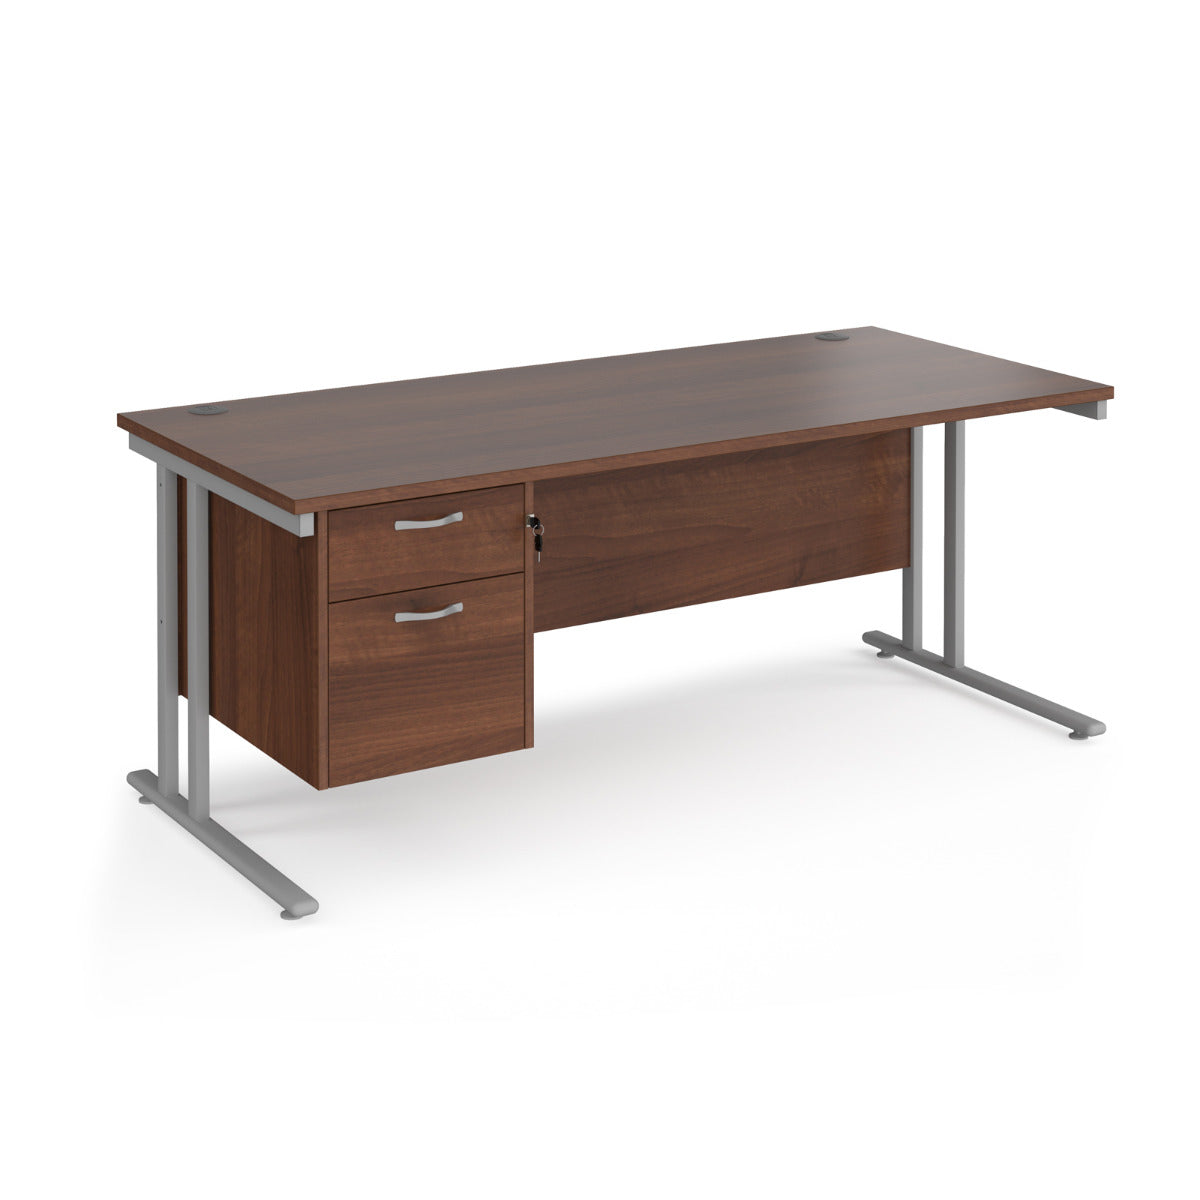 Maestro 800mm Deep Straight Cantilever Leg Office Desk with Two Drawer Pedestal